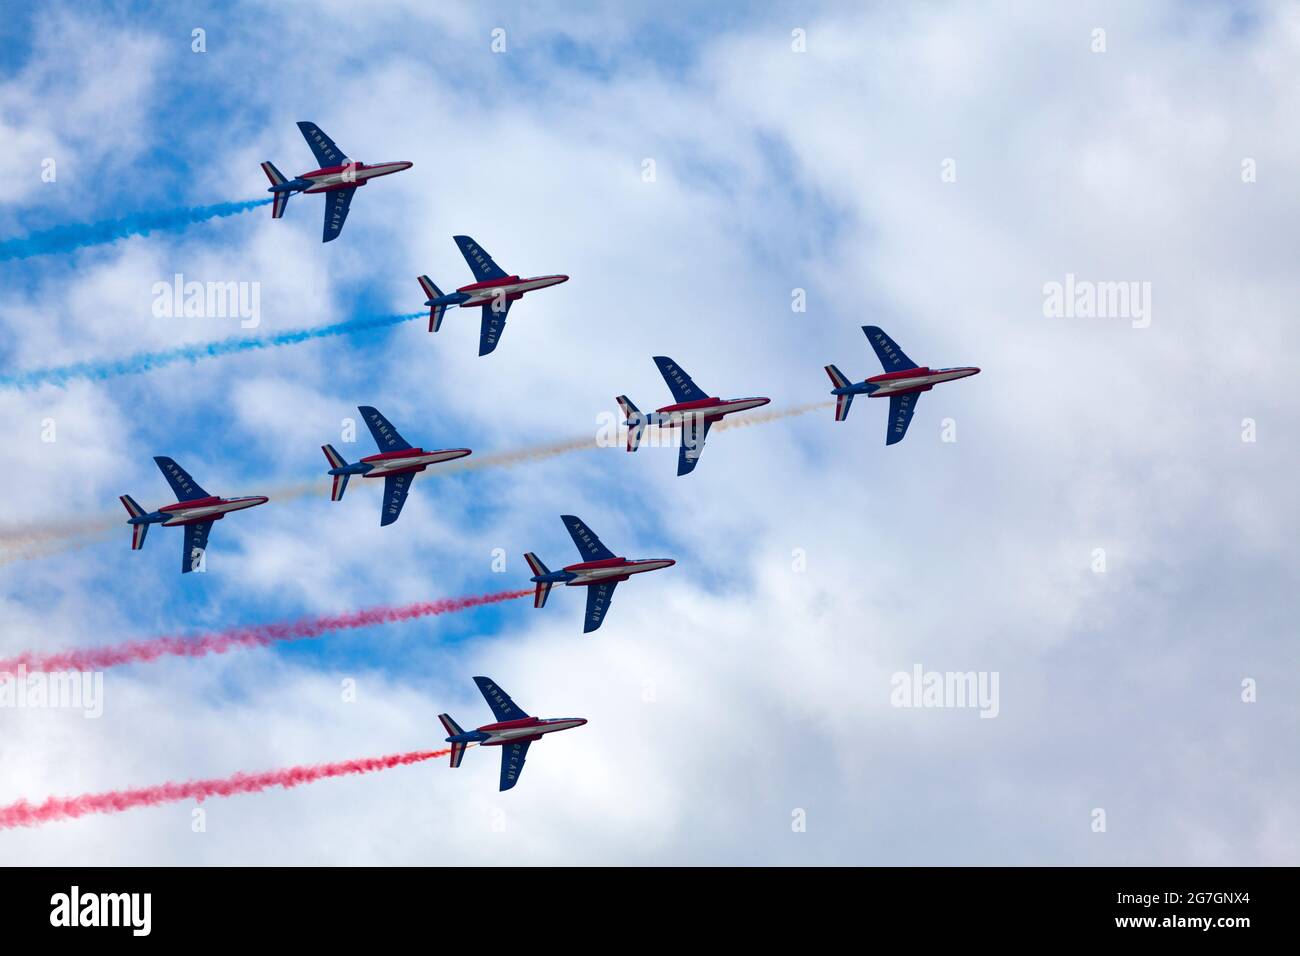 Paris, France - July 14 2021: The French Air Patrol (French: Patrouille de France) performing a demonstration to celebrate the Bastille Day. Stock Photo